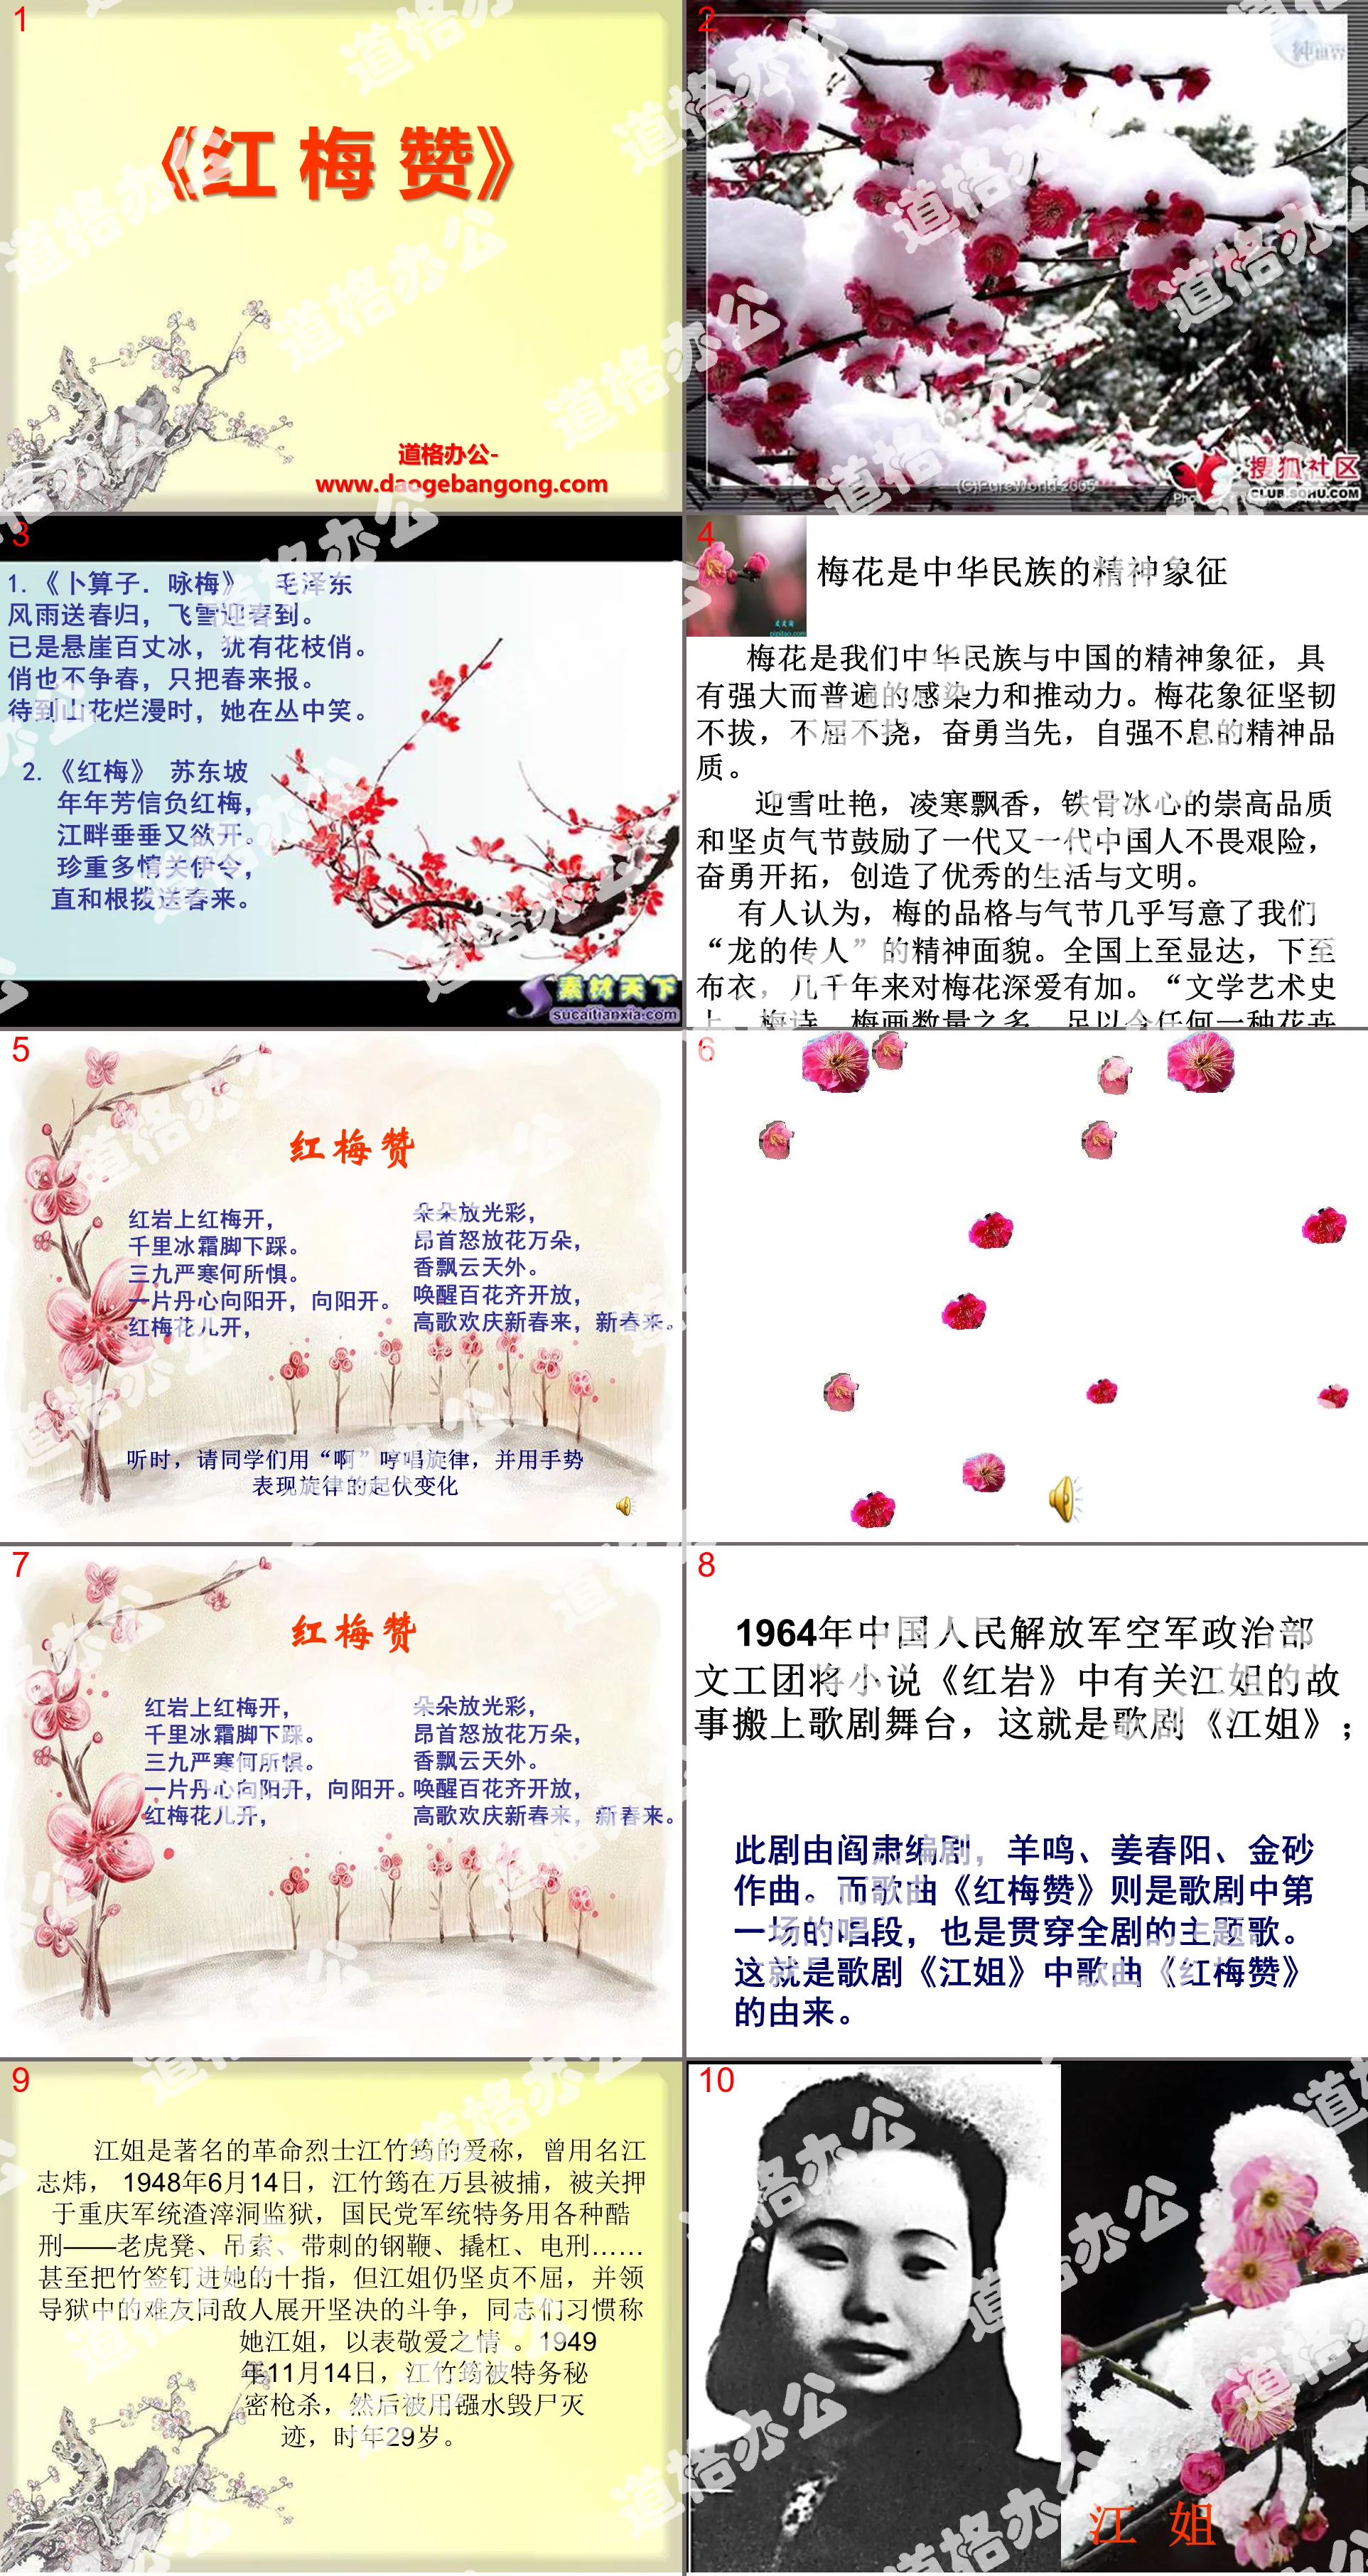 "Ode to Red Plum Blossoms" PPT courseware